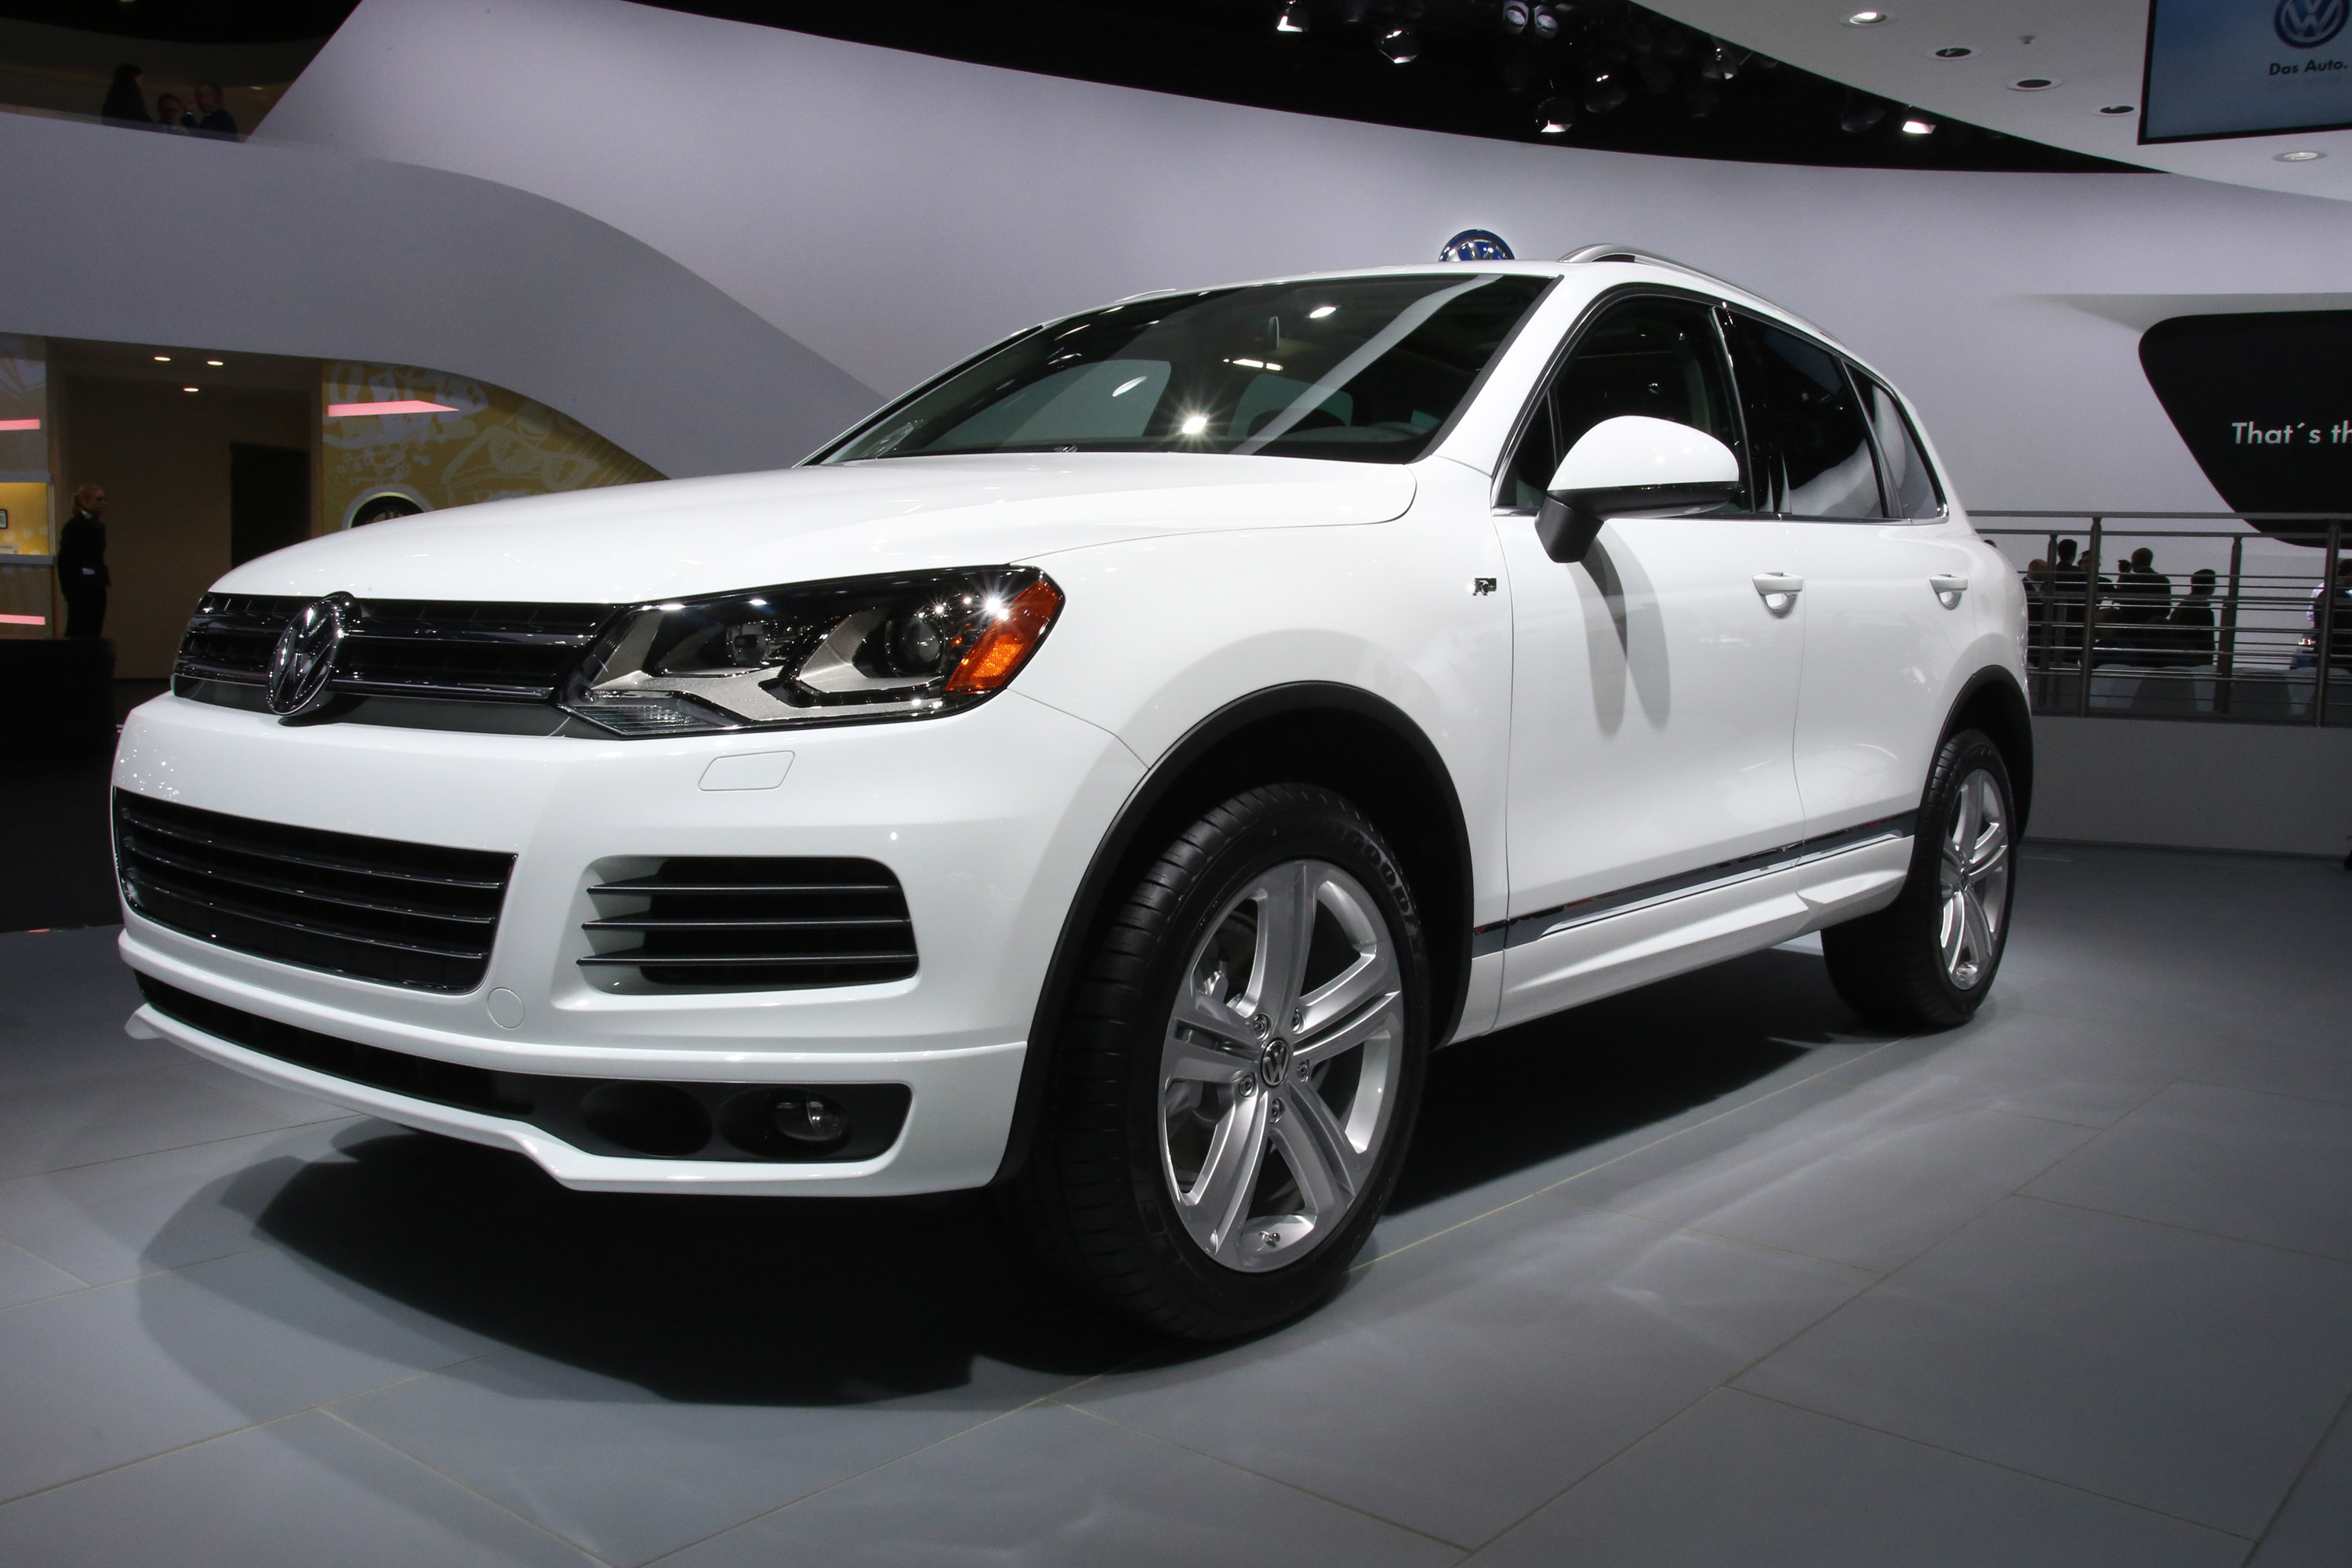 Volkswagen Touareg 2013 Review, Amazing Pictures and